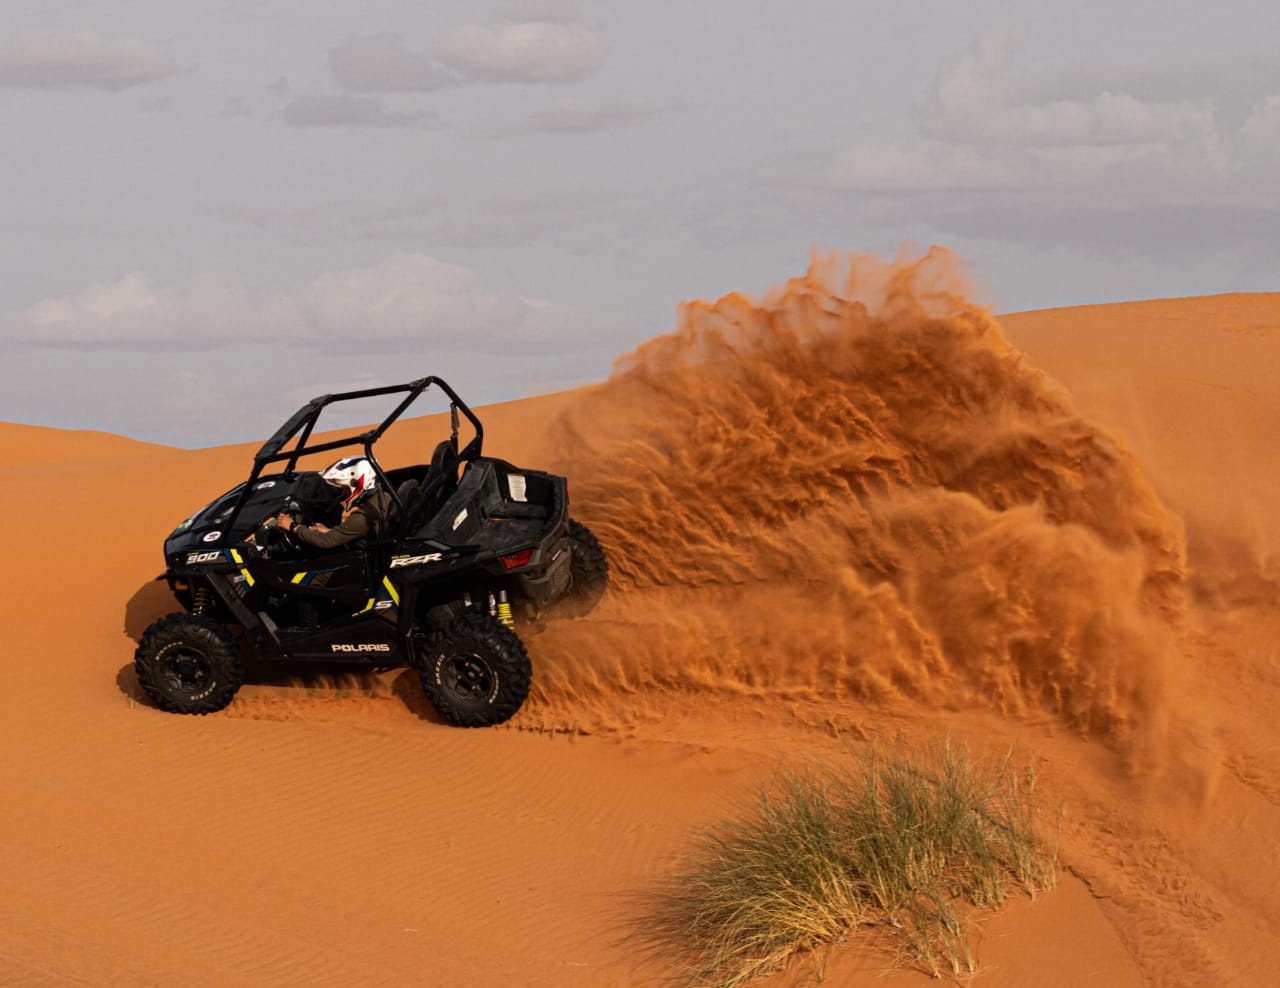 Rental of buggy and quad